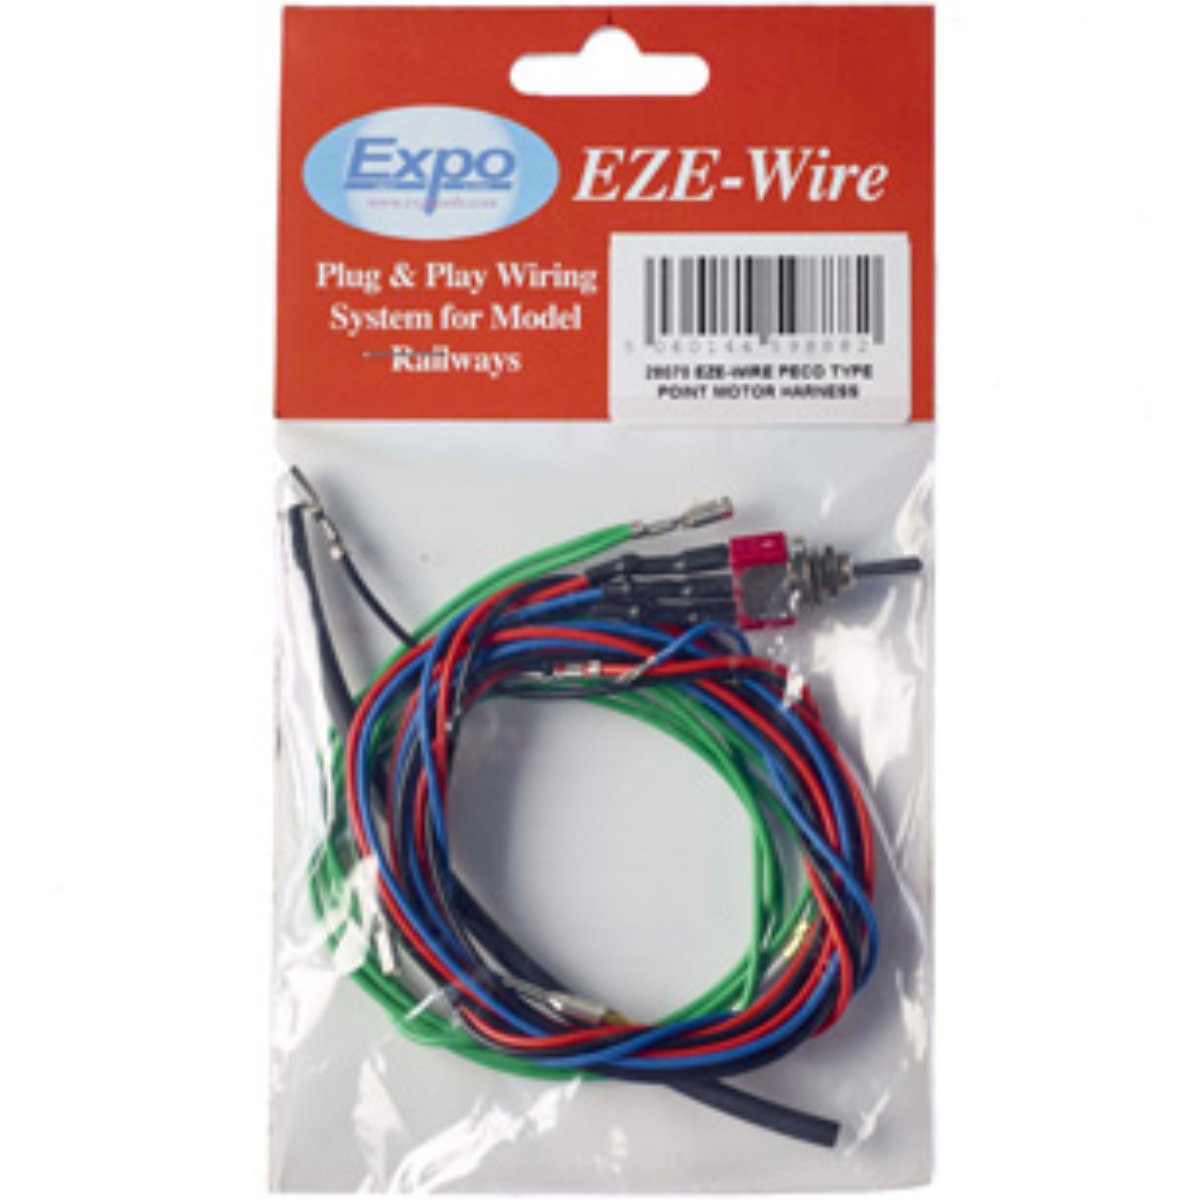 Expo Tools 28070 EZE-Wire Pont Motor Harness For Peco